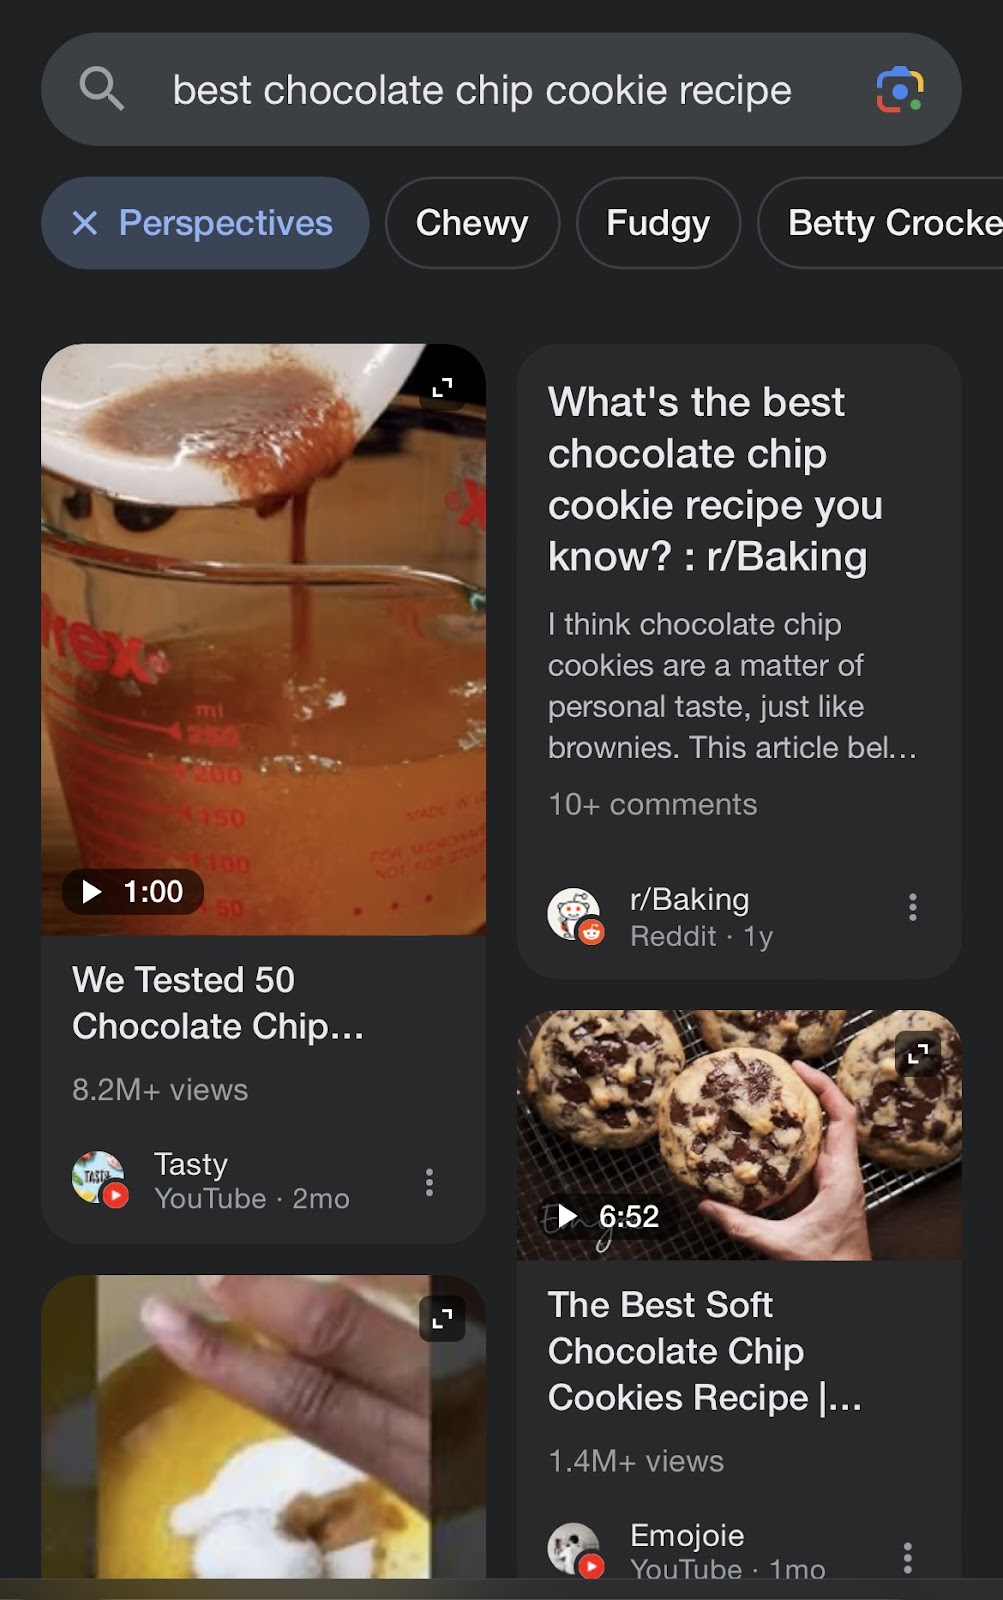 Google Perspectives mobile search results for chocolate chip cookie recipes